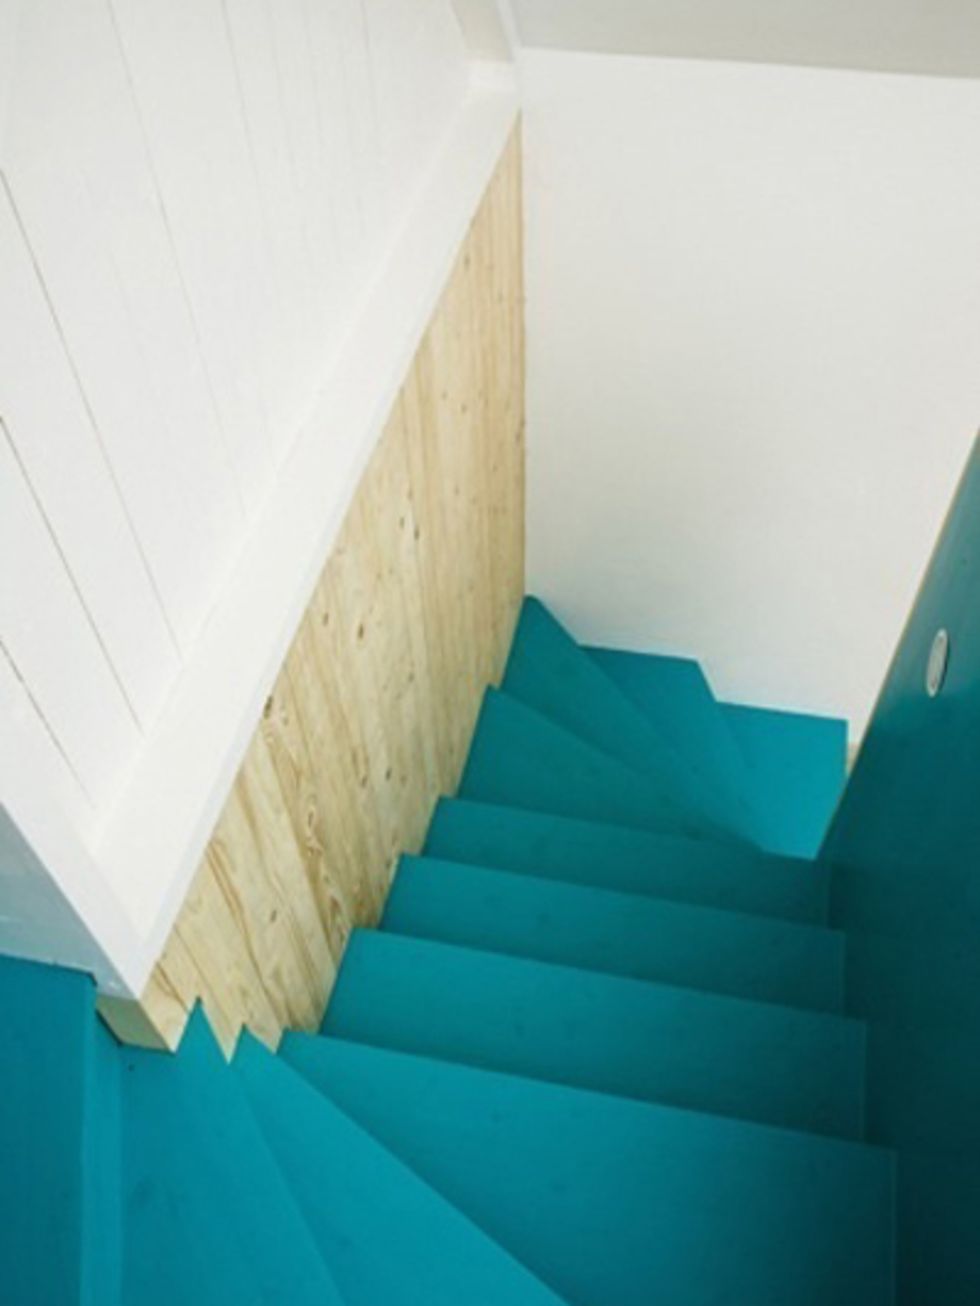 Stairs, Property, Teal, Turquoise, Aqua, Composite material, Paint, Building material, Handrail, 